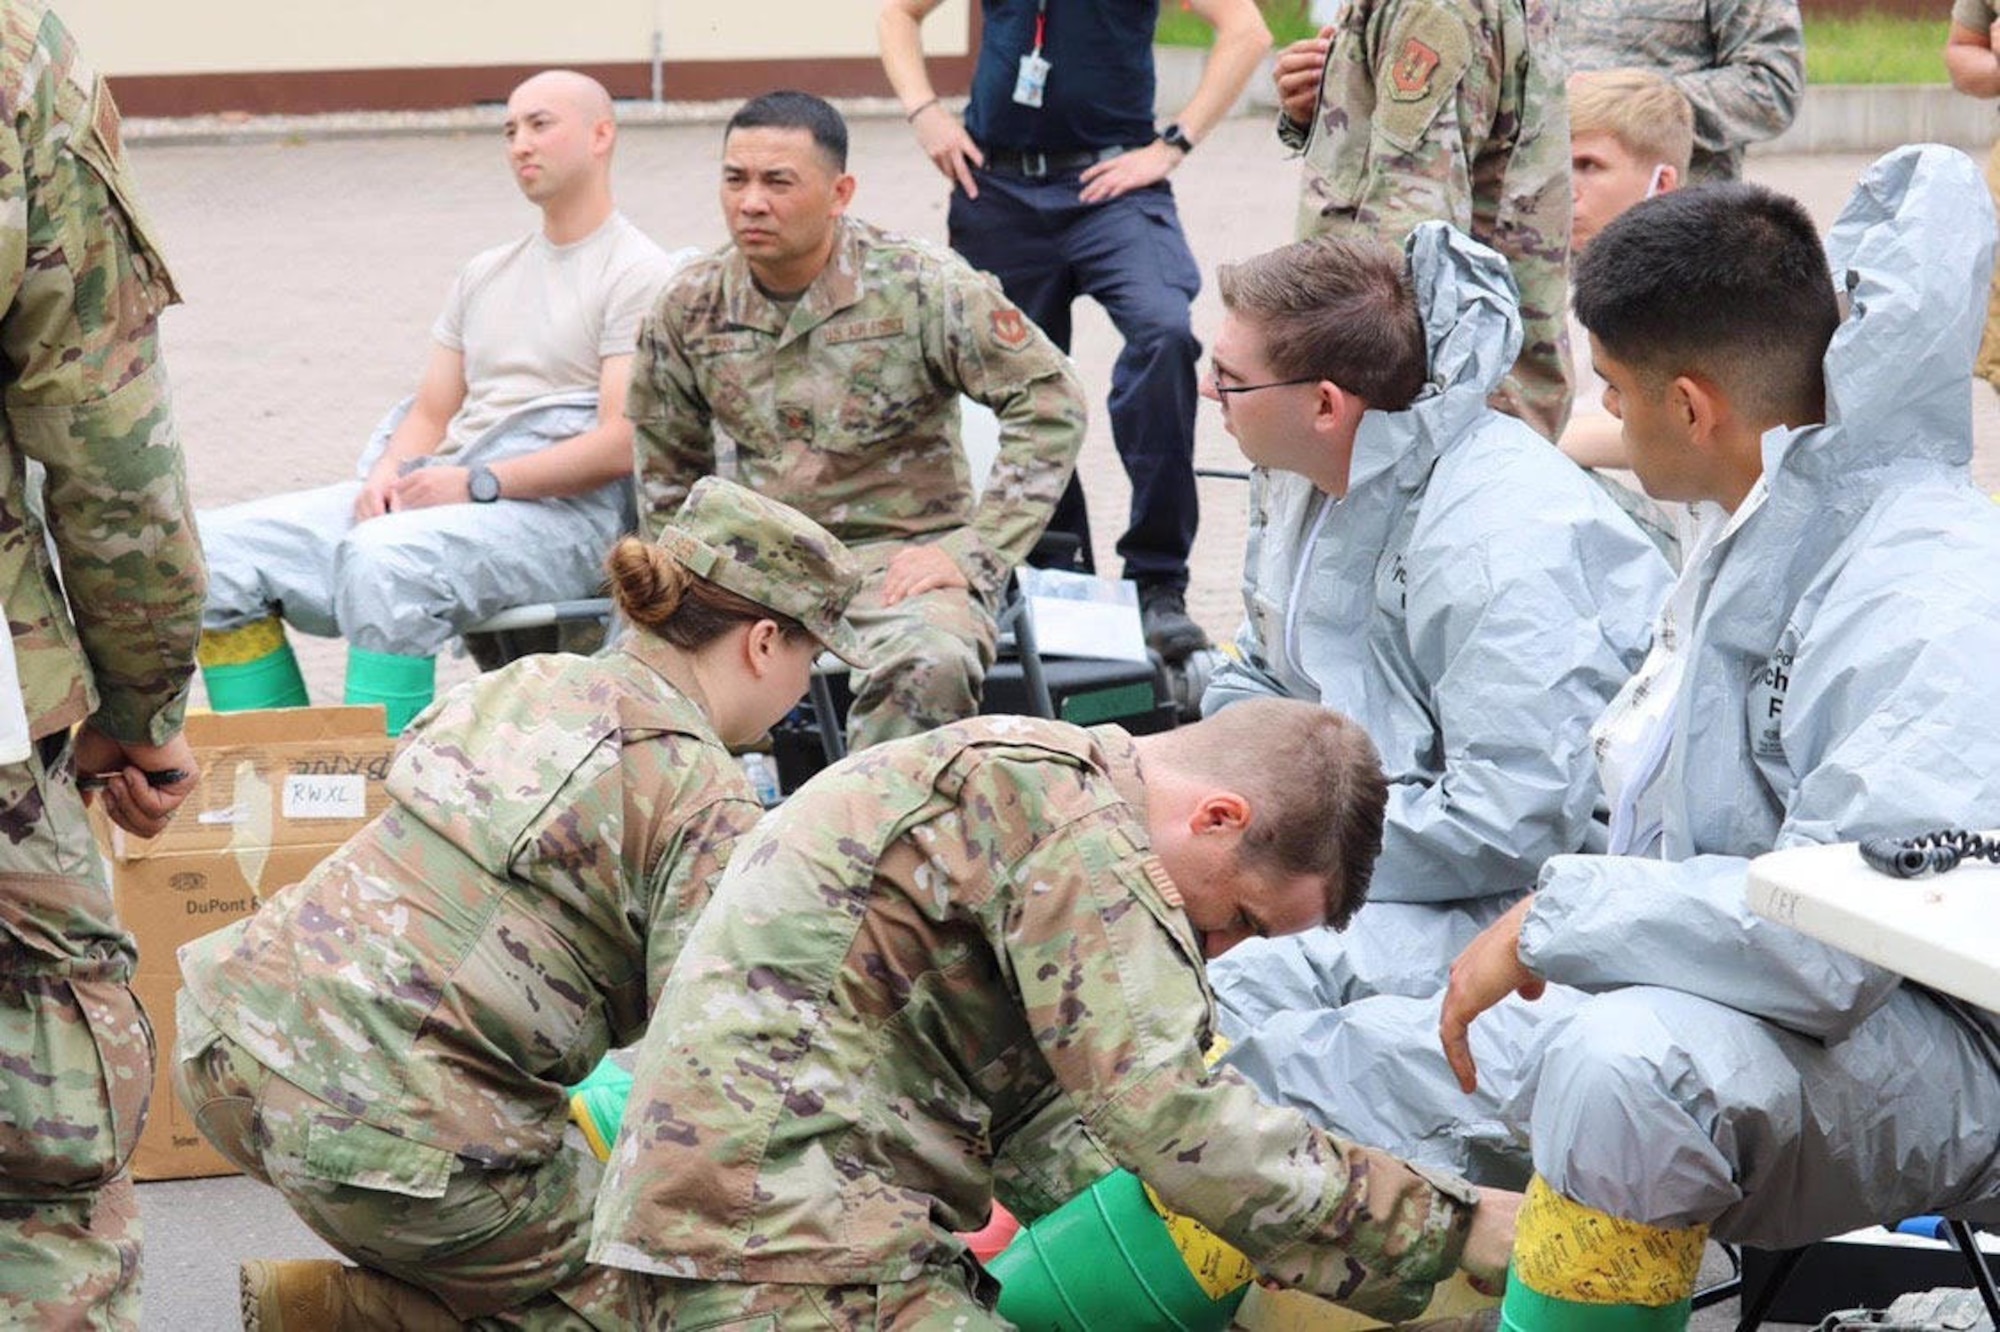 U.S. Air Force Airmen, assigned to the 786th Civil Engineer Squadron Emergency Management flight assist fellow Airmen by taping their Level B suits with protective ChemTape in preparation for entry into a potentially contaminated area at Landstuhl Regional Medical Center, Germany, June 16, 2020.